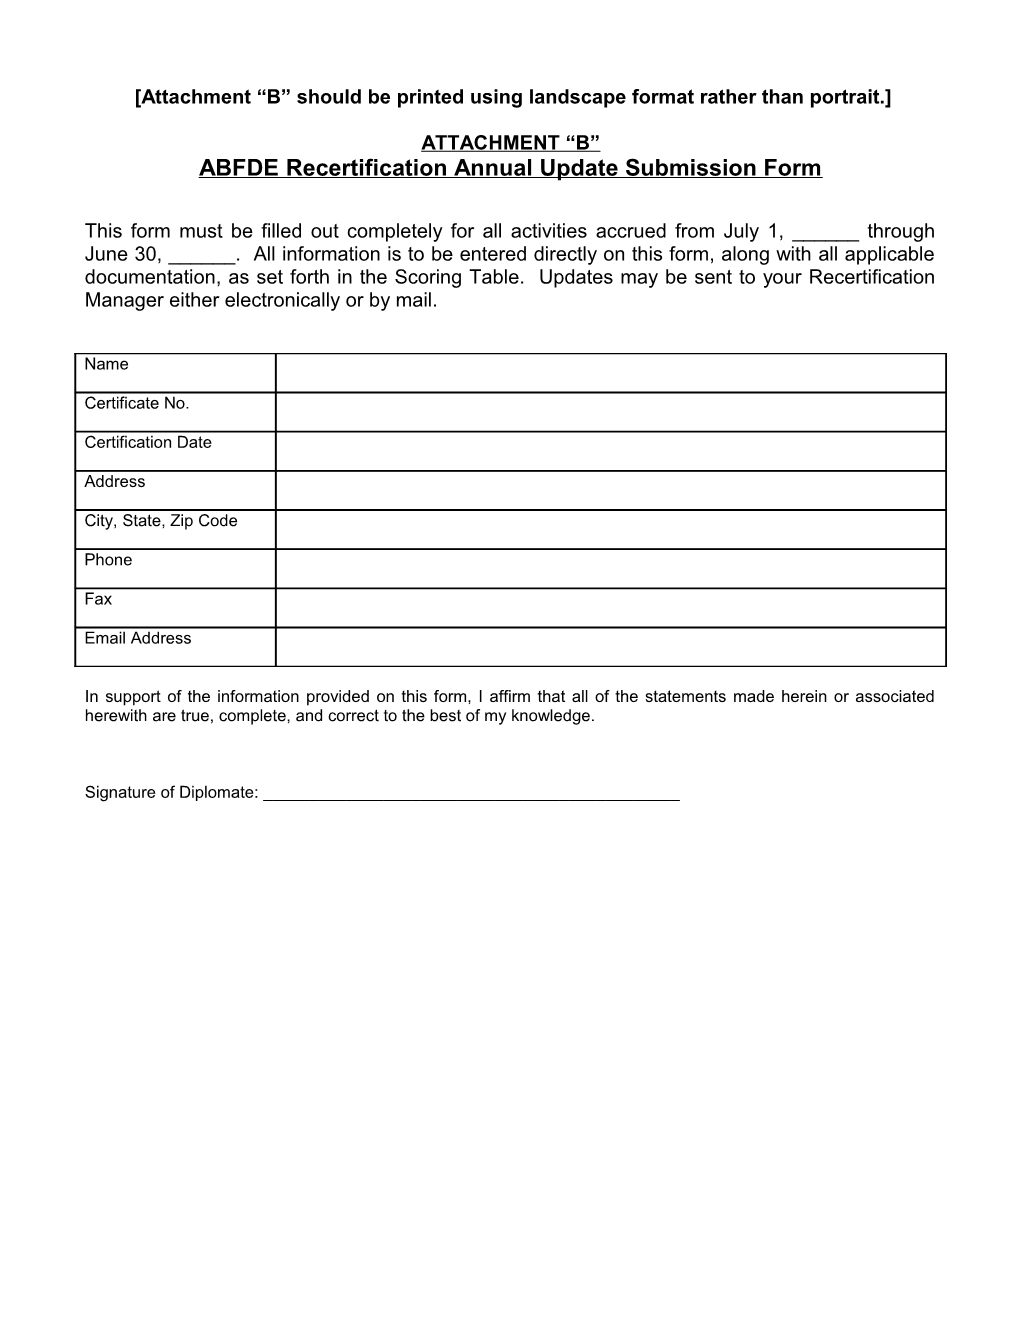 ABFDE Recertification Annual Update Submission Form